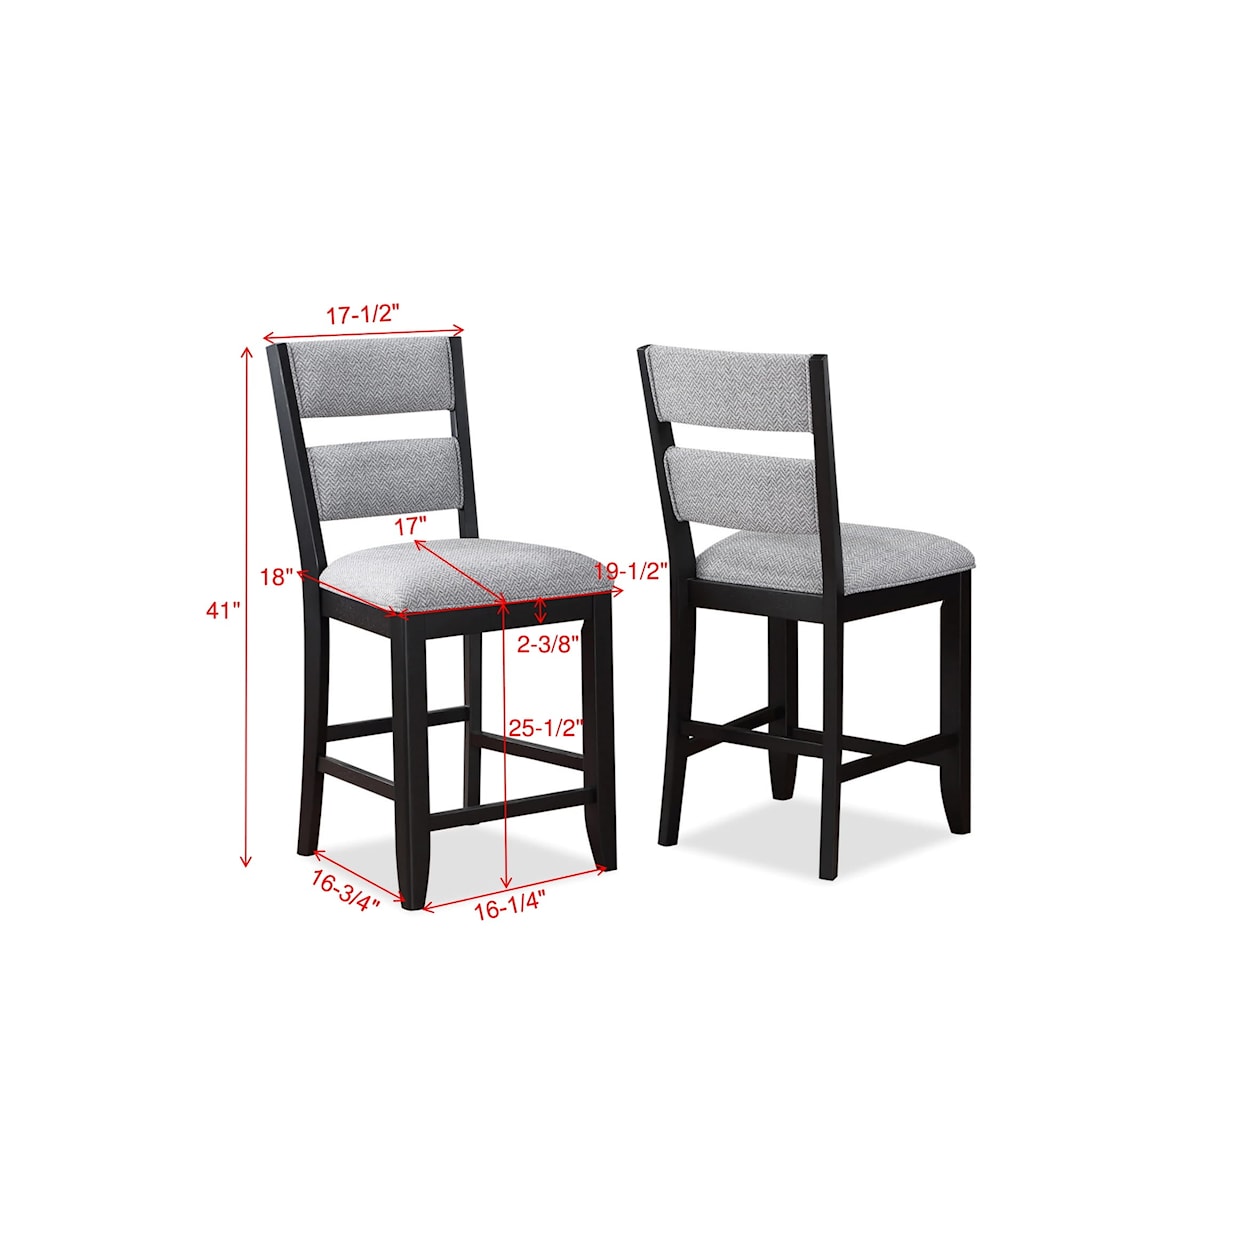 CM Wendy Upholstered Counter-Height Dining Chair